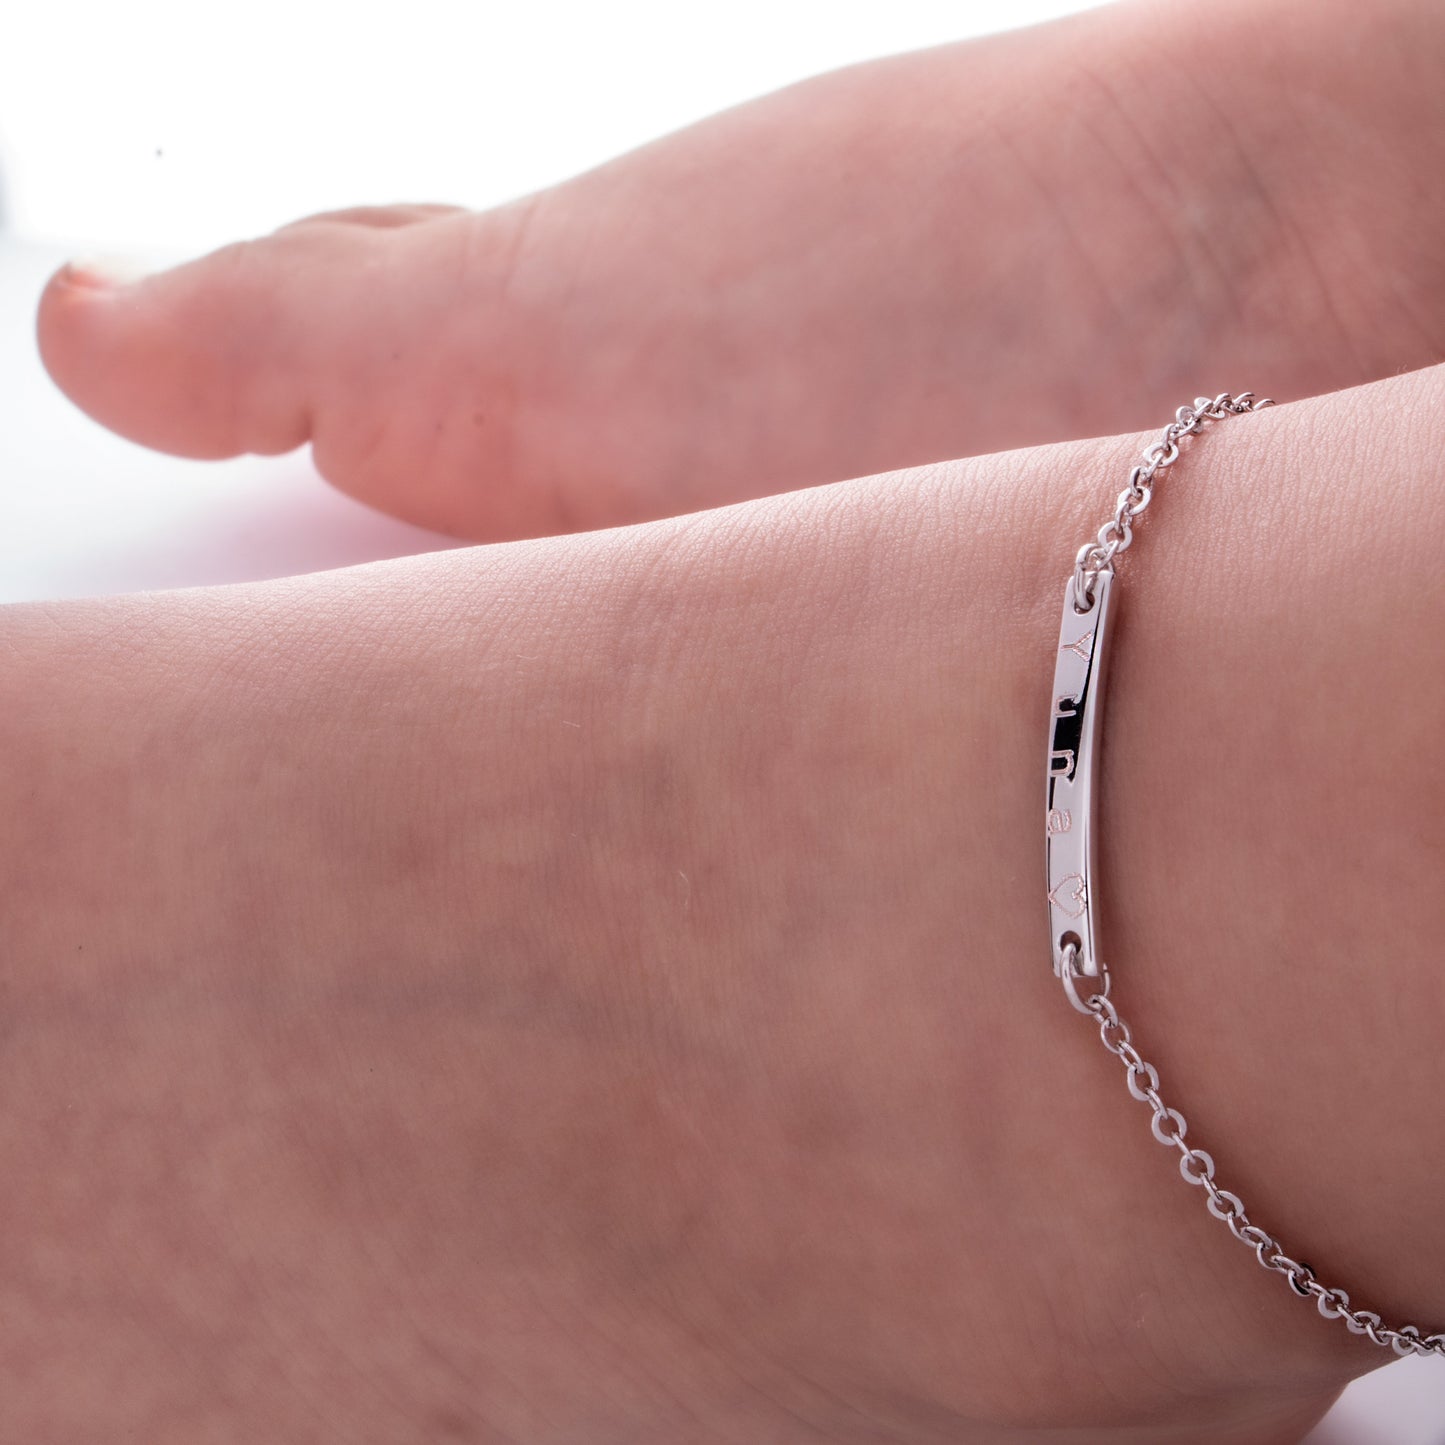 Personalized Baby Anklet Birthday gift Ideas for baby